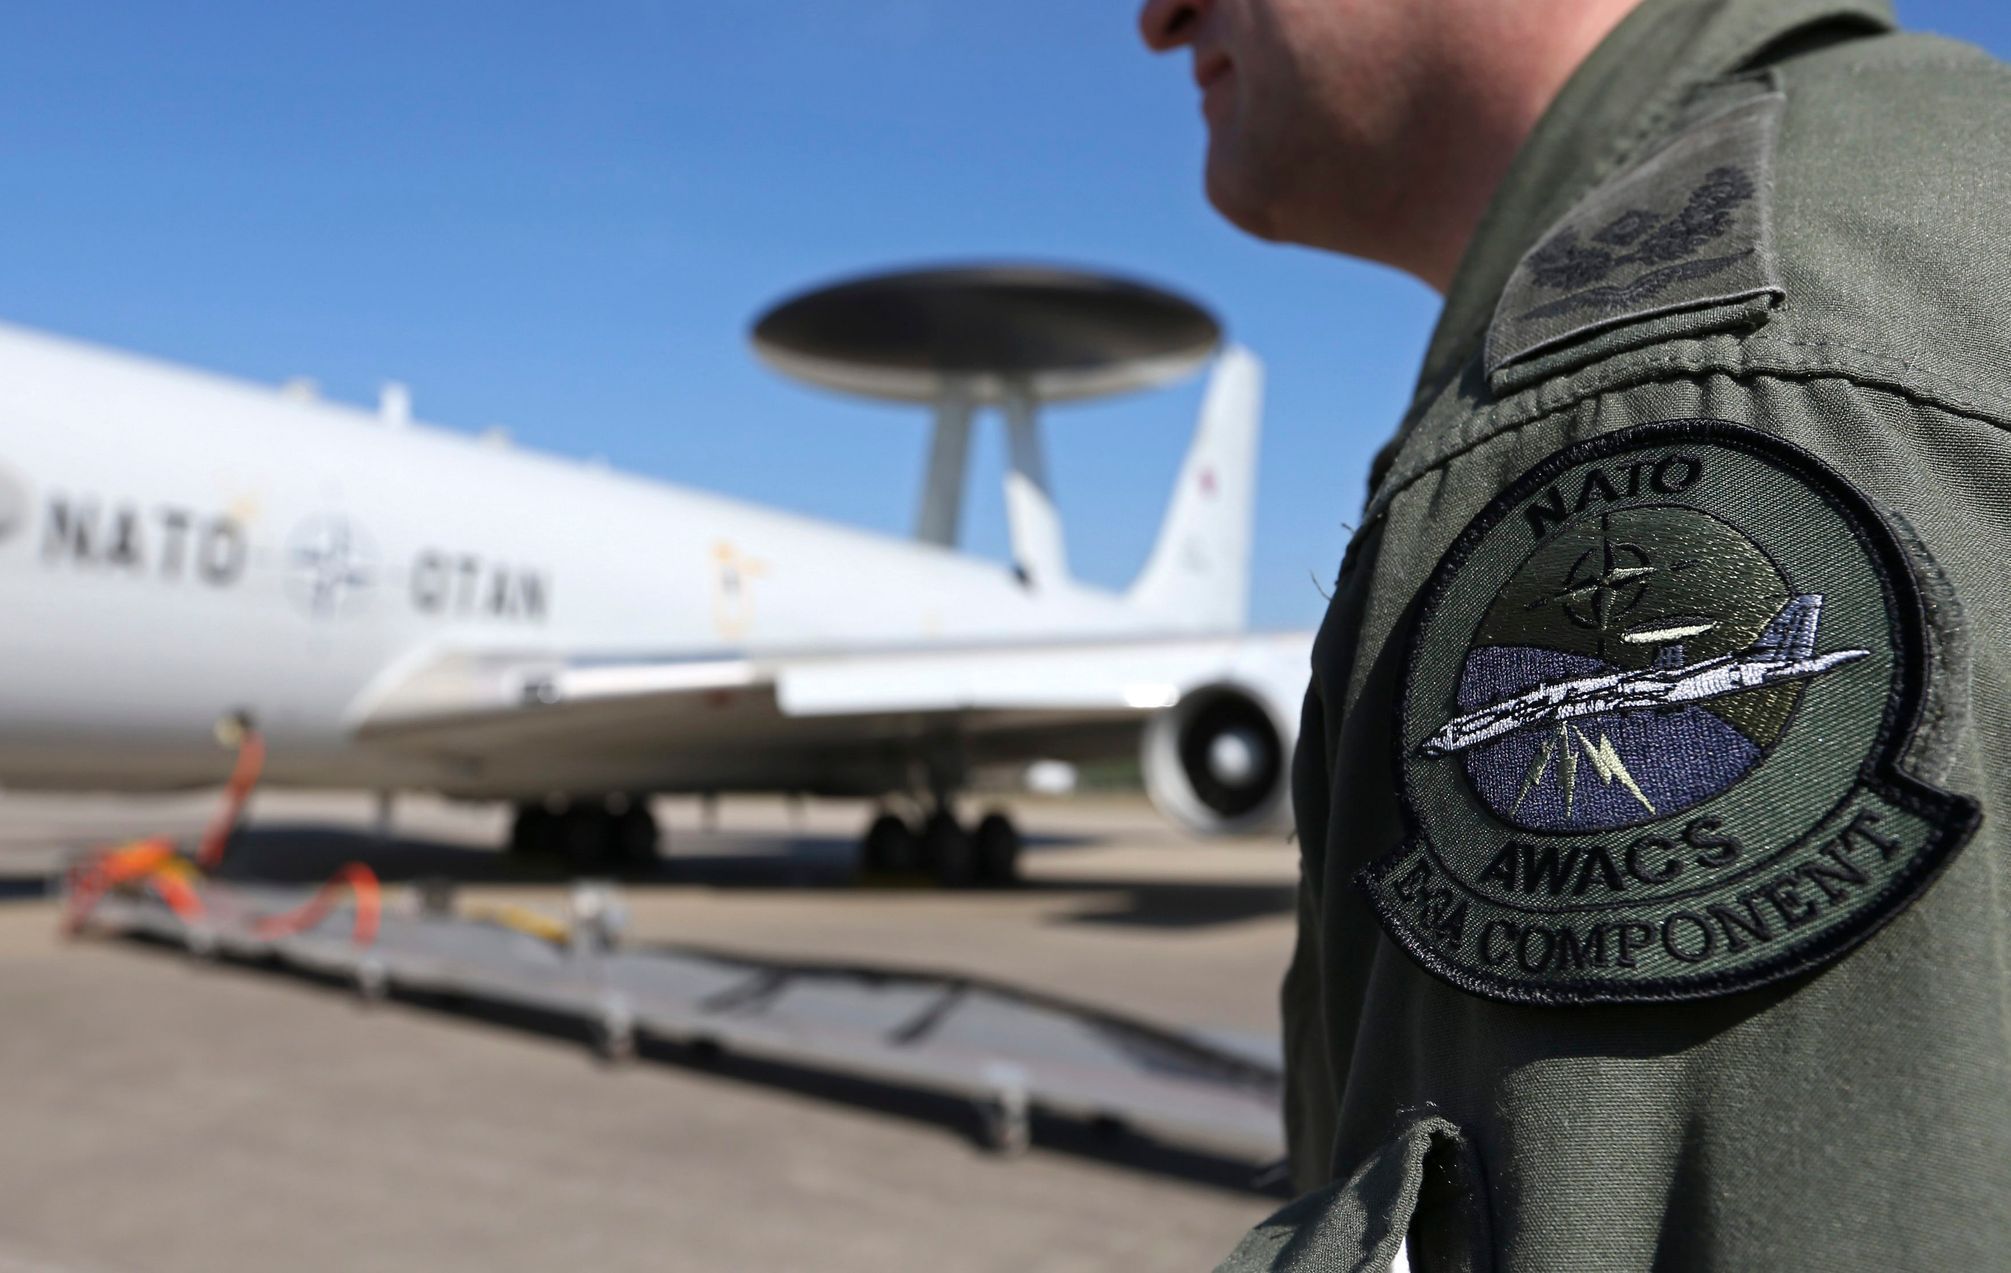 The patch of the NATO AWACS aircraft is seen attached to the uniform of an officer before boarding for a surveillance flight over Romania from the AWACS air base in Geilenkirchen near the German-Dutch